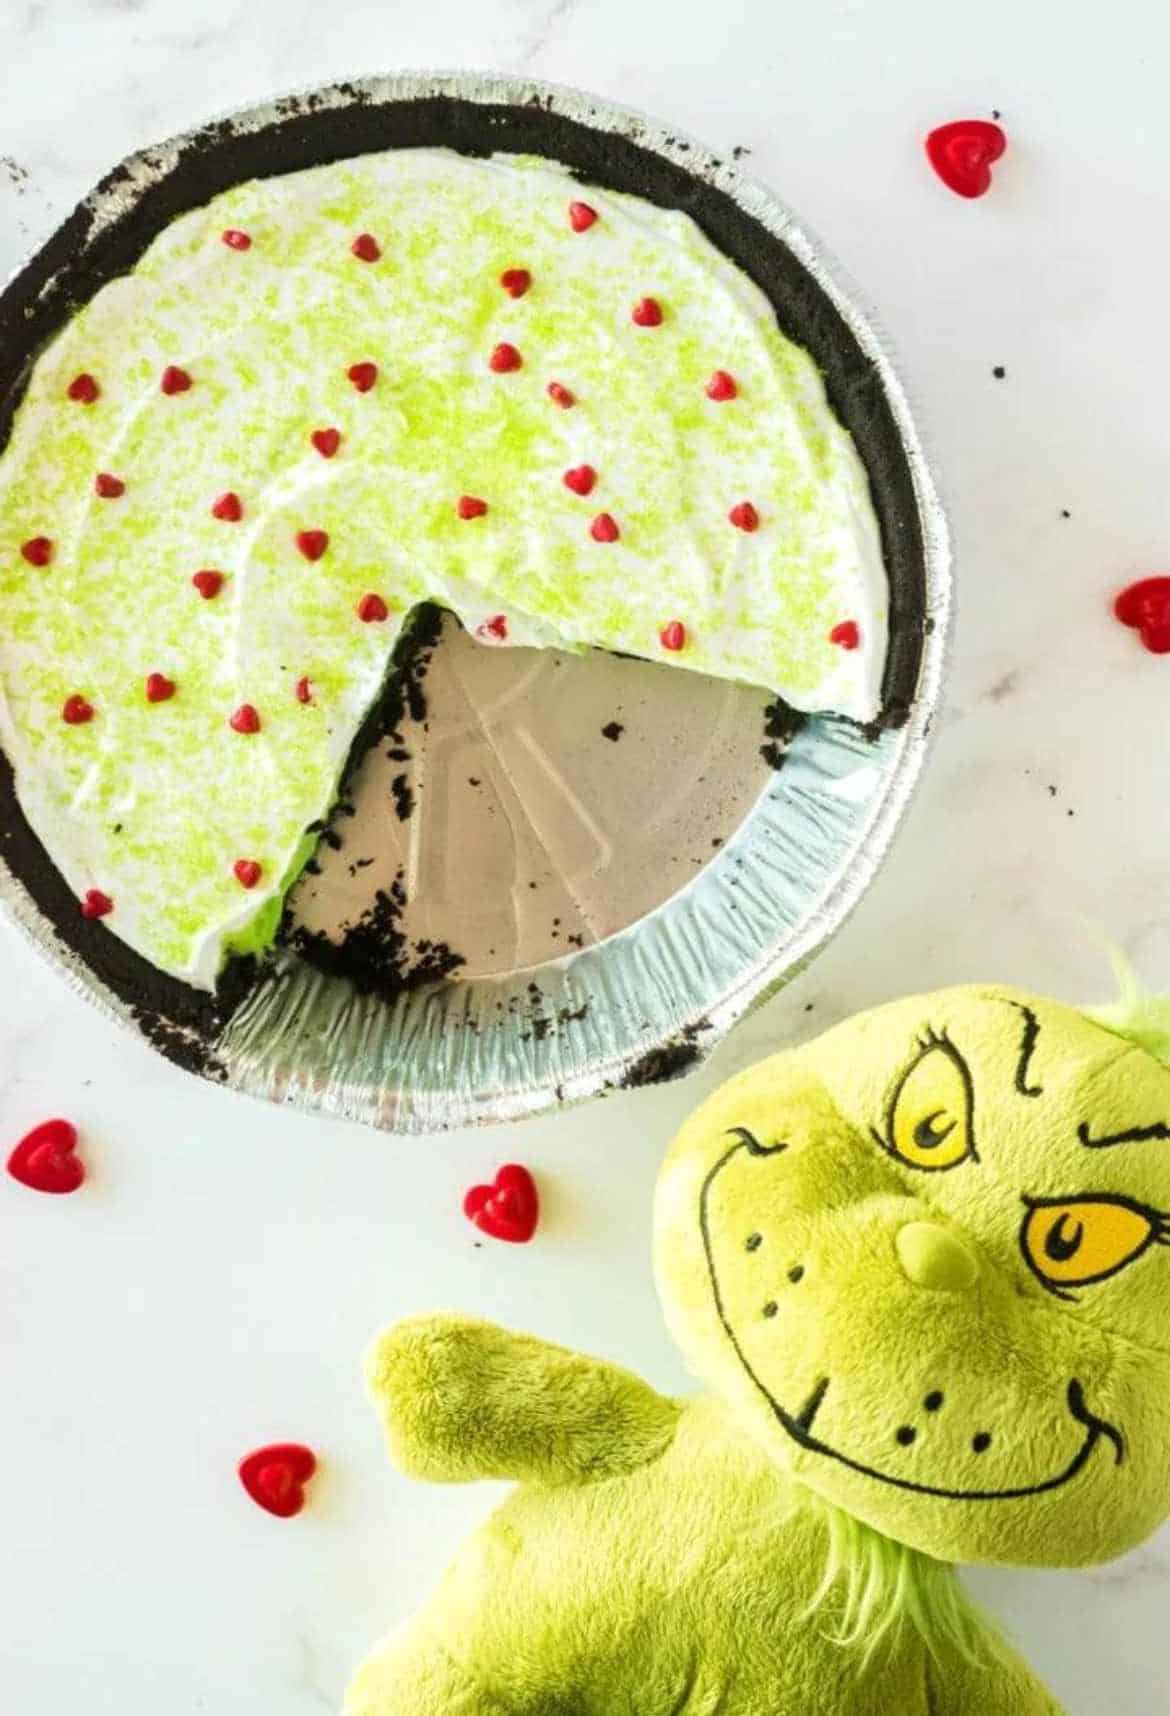 Green pie with chocolate crust and red heart sprinkles next to a Grinch stuffed toy.